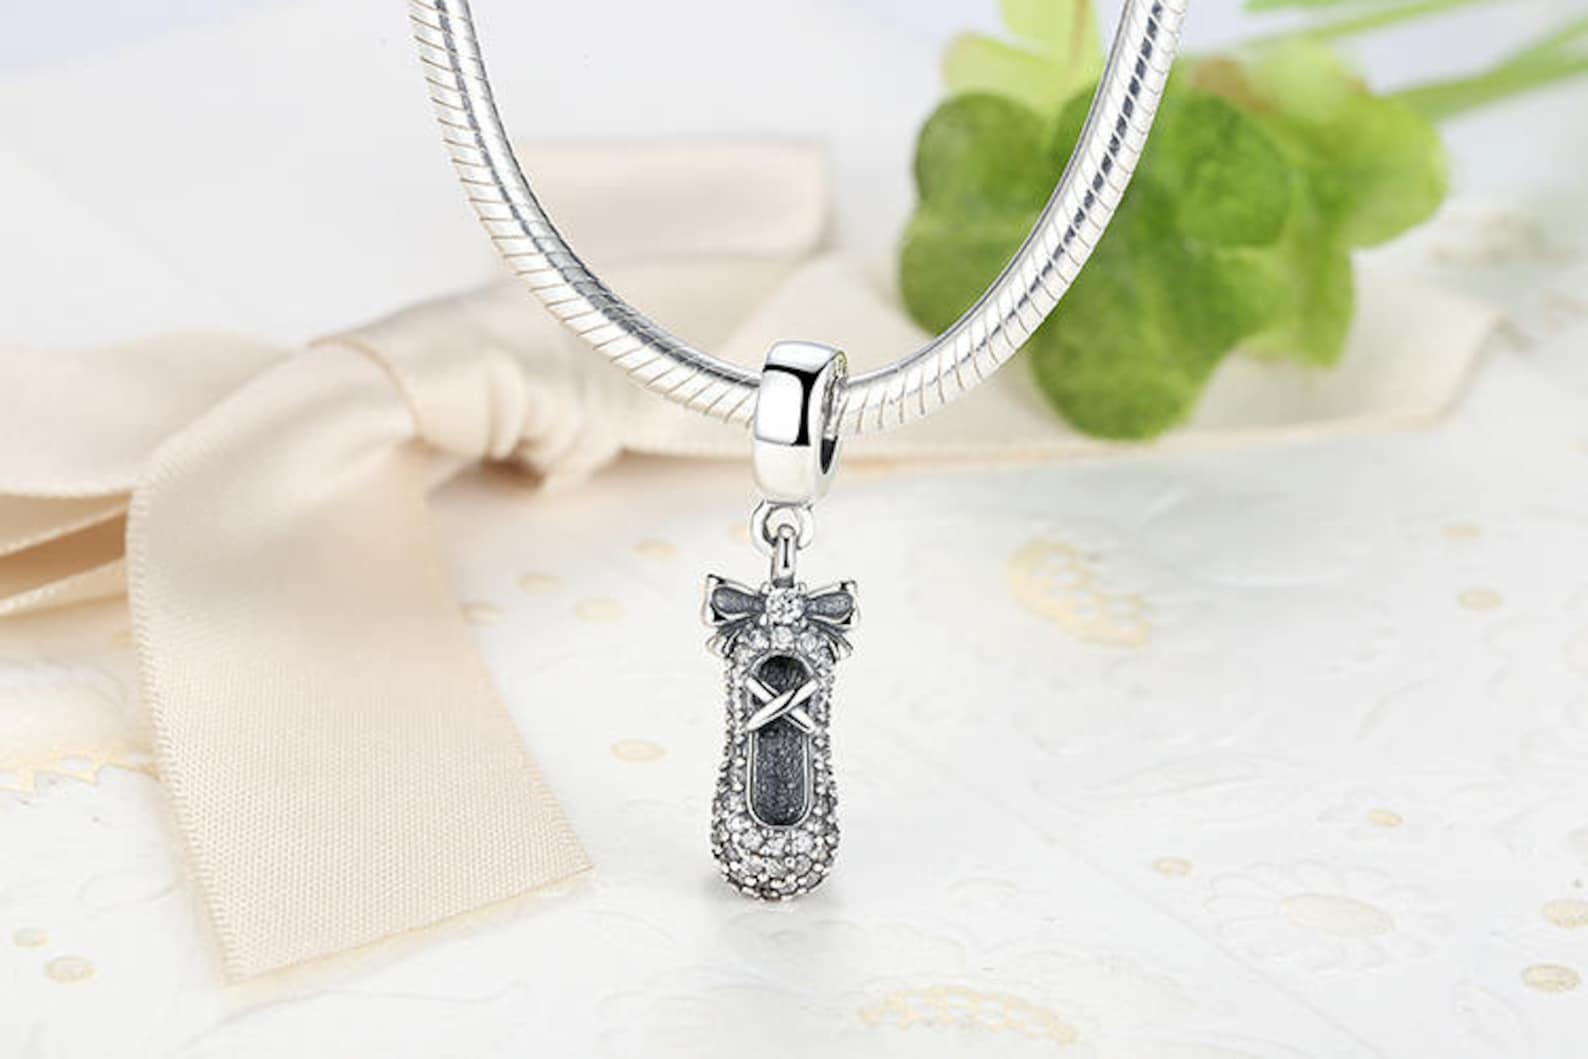 ballet slipper dance shoes with clear cz beads charms authentic 925 sterling silver charms fits european pandora charm bracelet